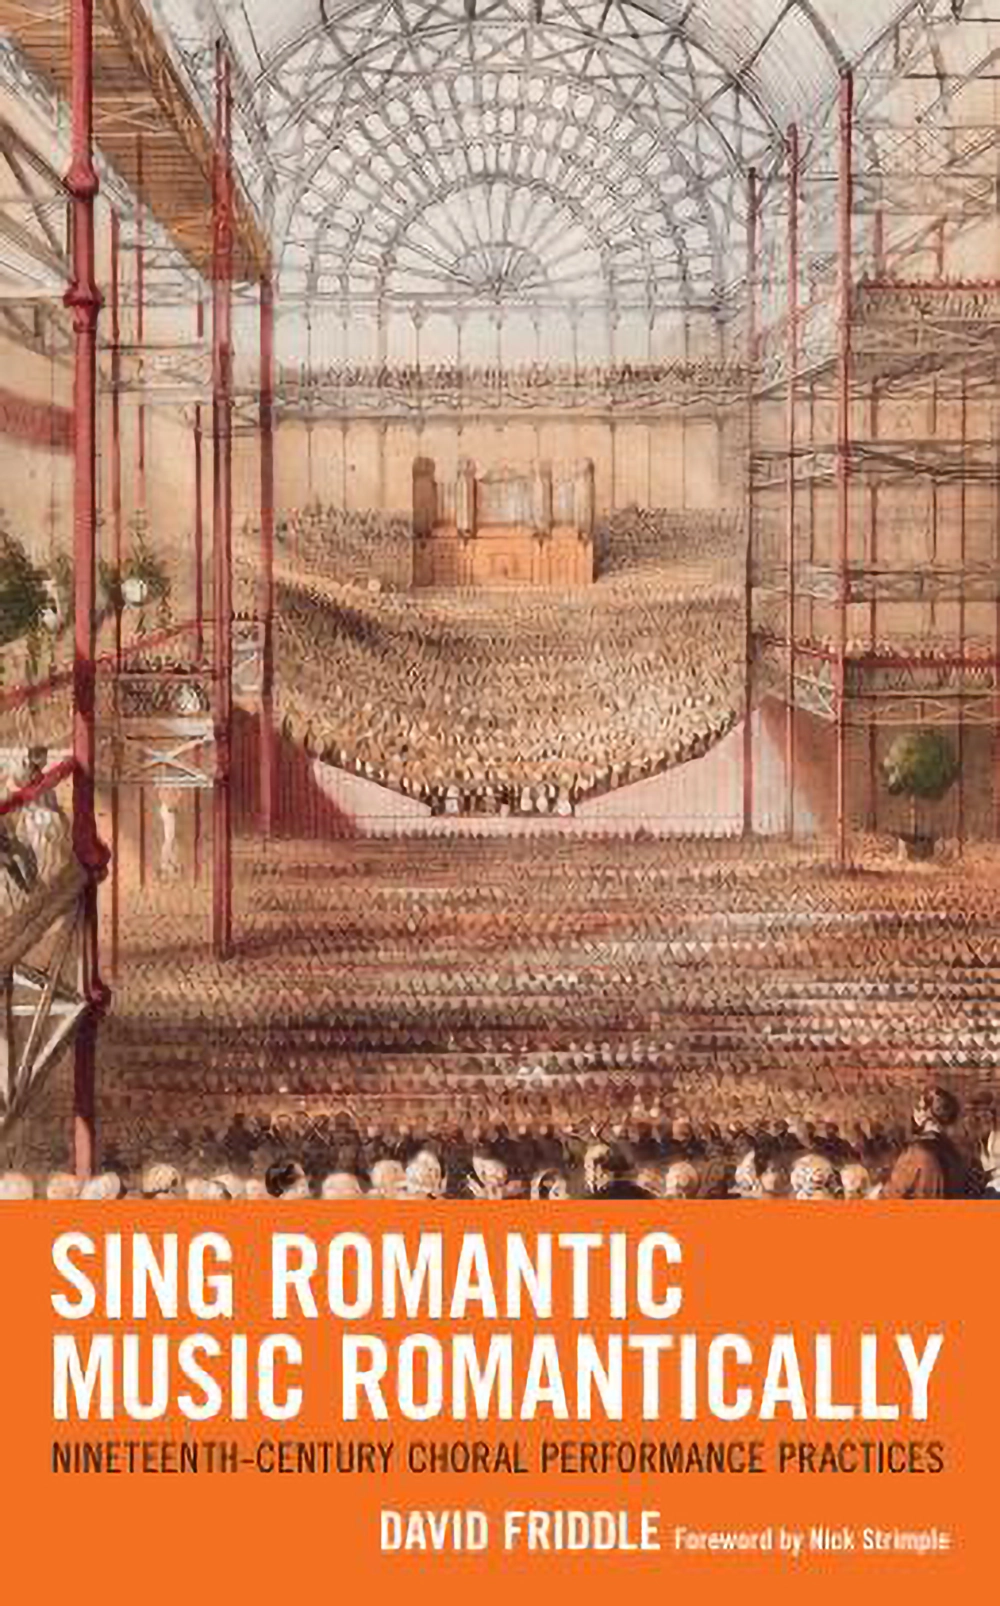 Album Cover "Sing Romantic Music Romantically." An artist pencil sketch of the Crystal Palace interior in the 1800's. The 200+ orchestra and choir flank a huge organ bay. An audience of uncountable rows is depicted in the foreground.